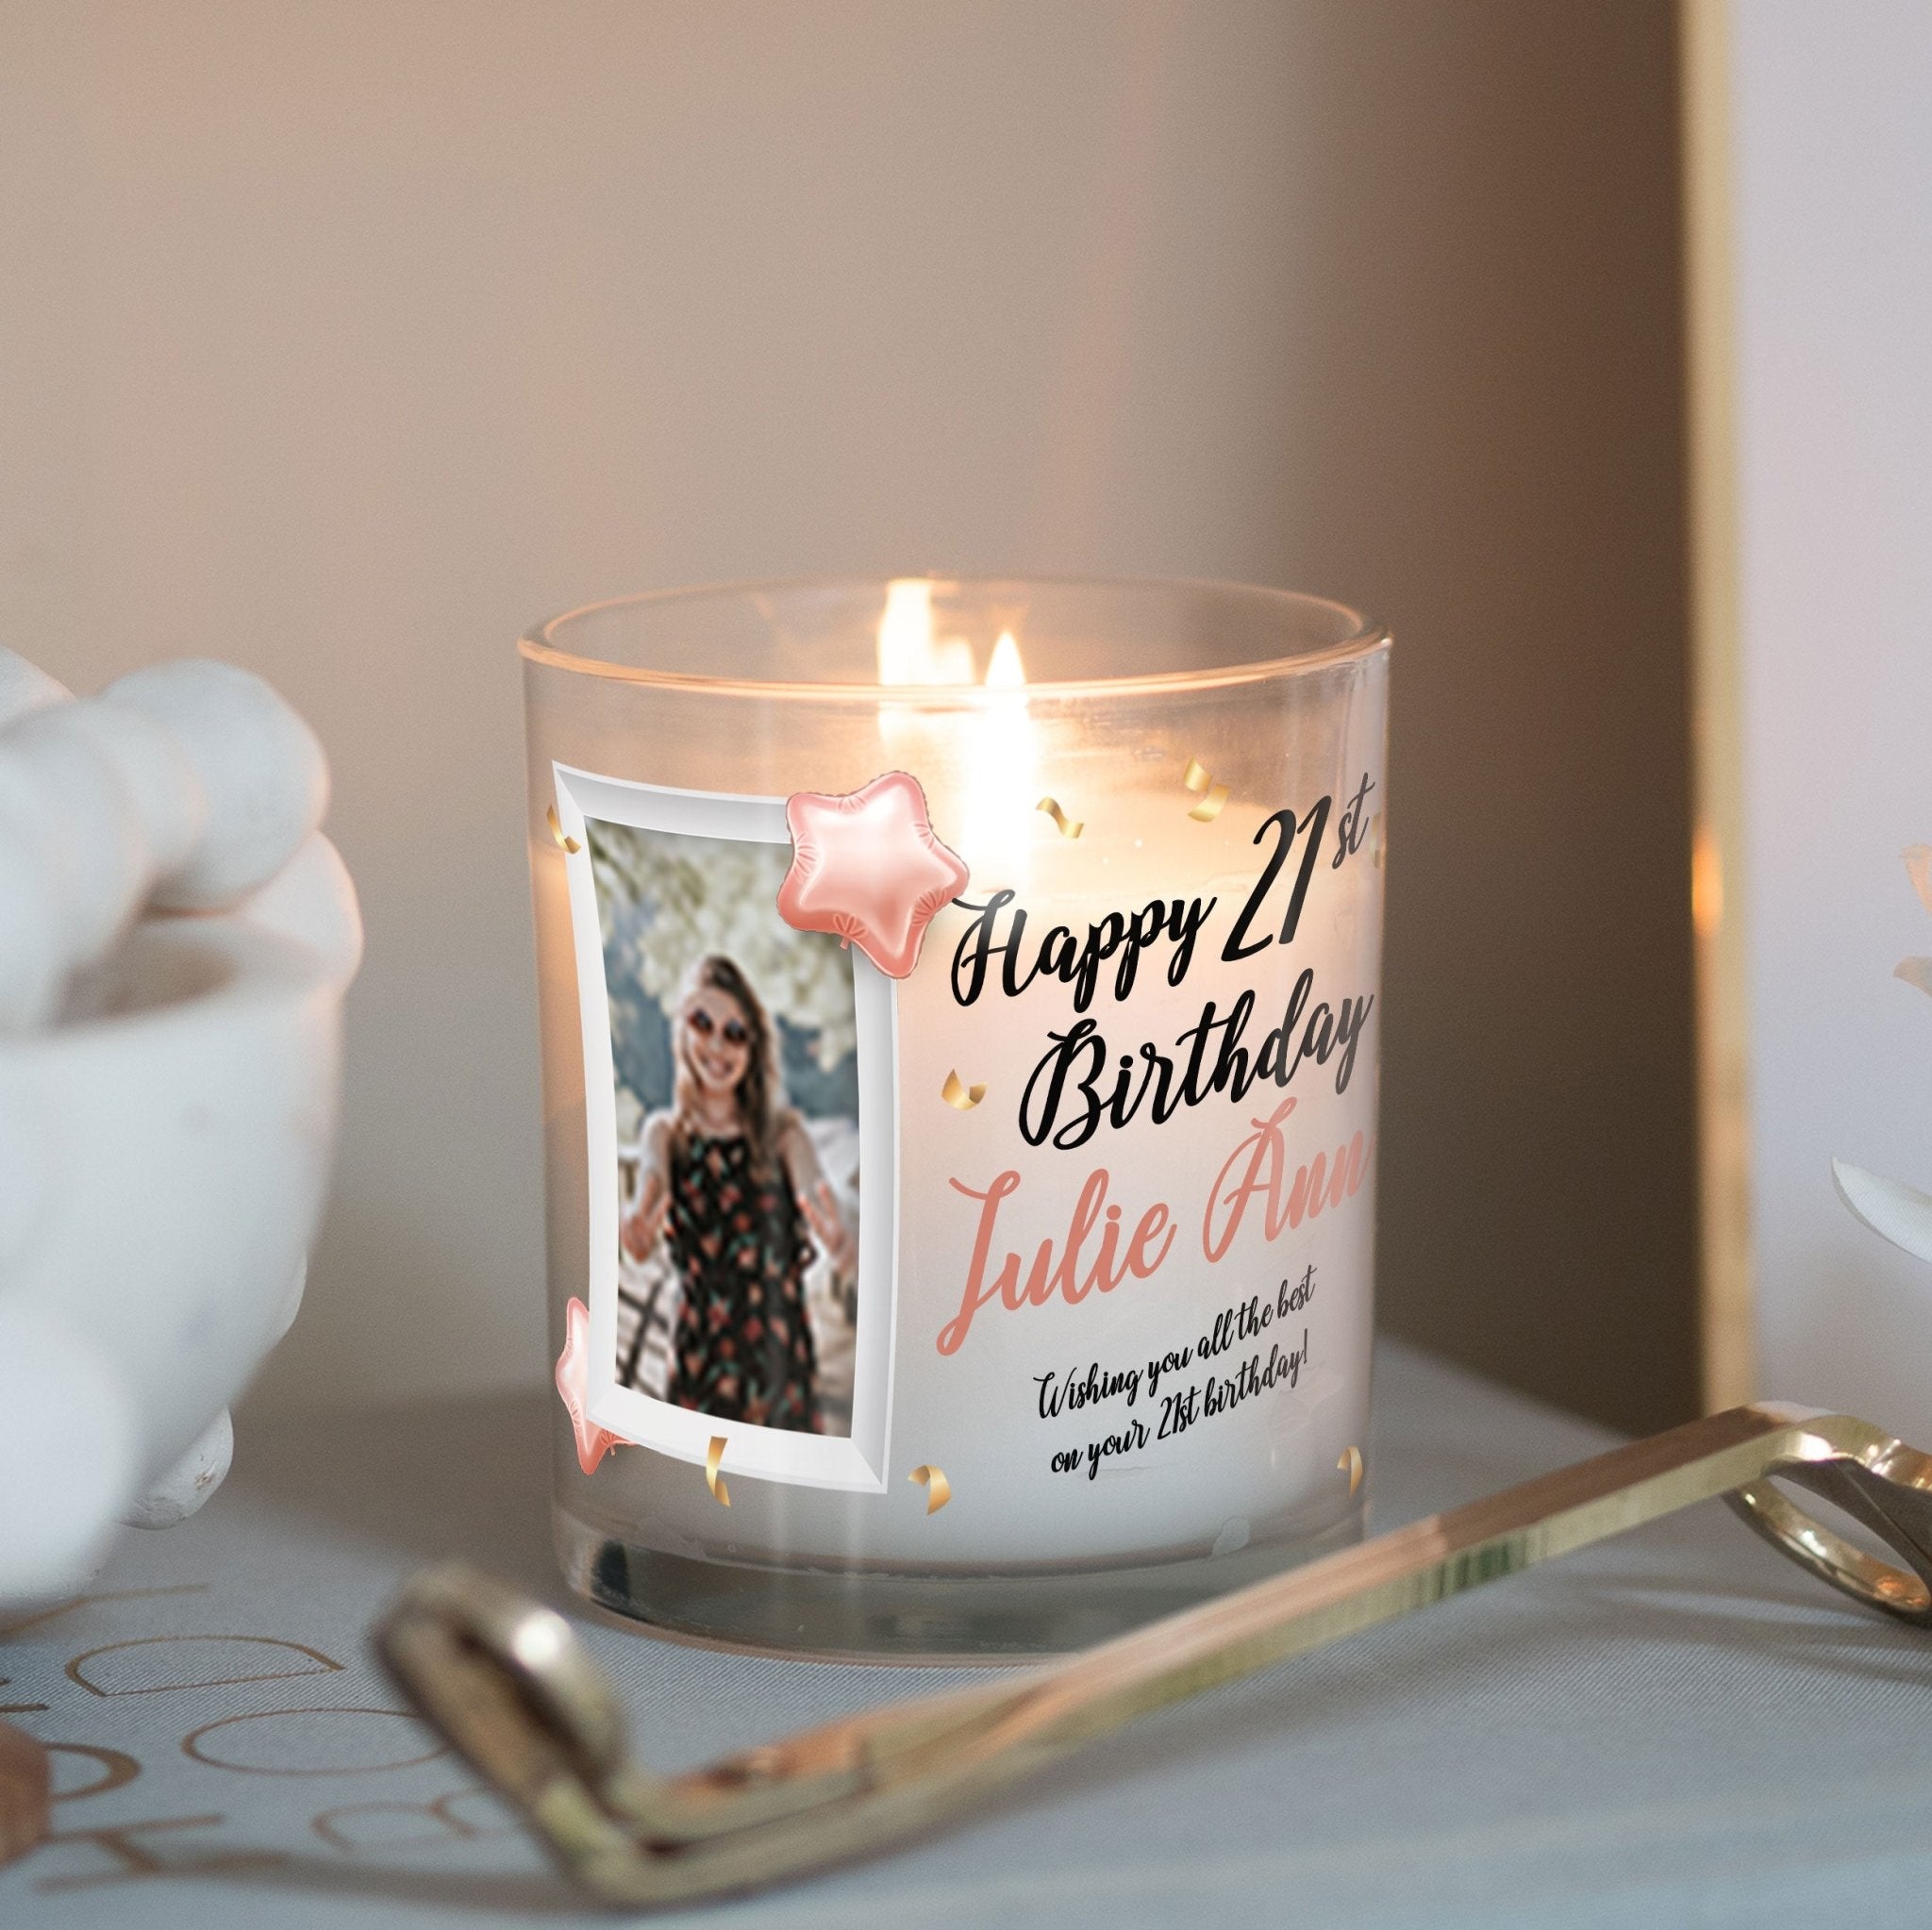 21st Birthday Custom Photo Glass Candleholder | Teen Girl Bday, Gift Ideas For Her | Personalised Votive Glass with Picture | Bday Present Candleholder - Unique Prints